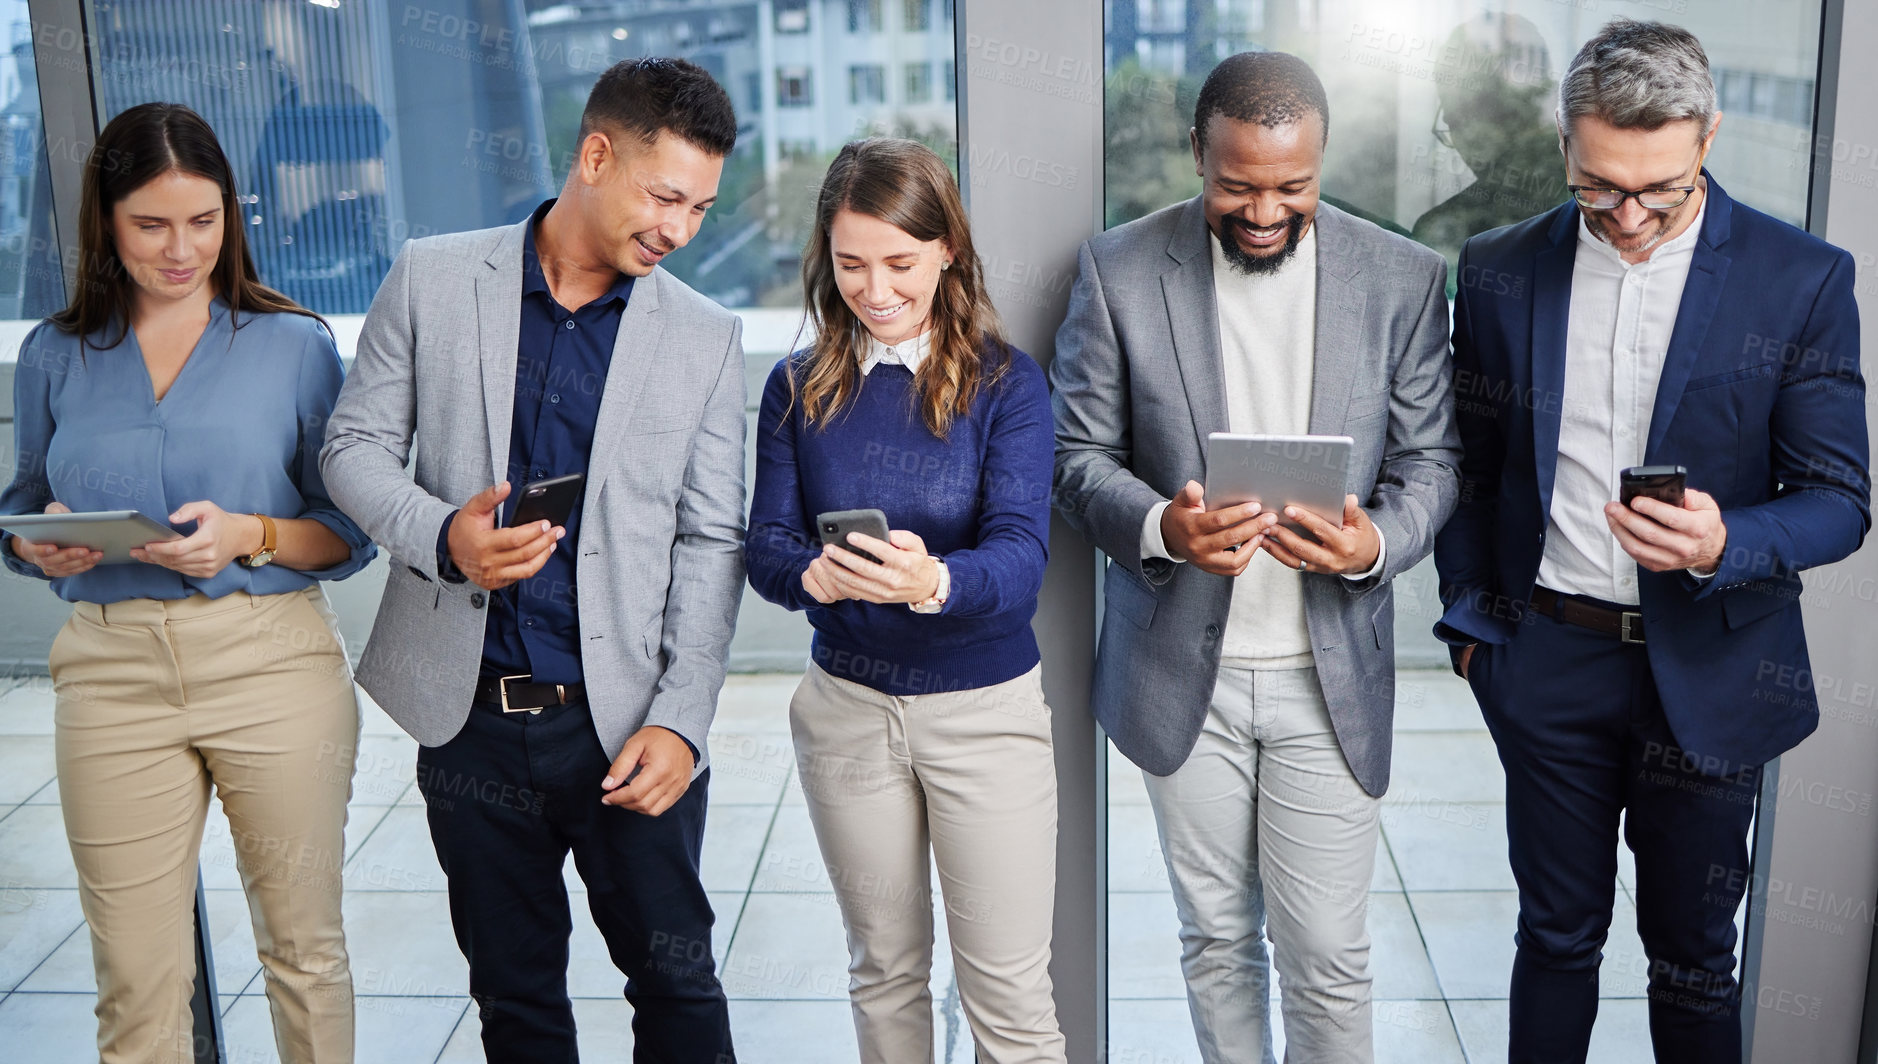 Buy stock photo Shot of a group of young businesspeople using digital devices while waiting in line